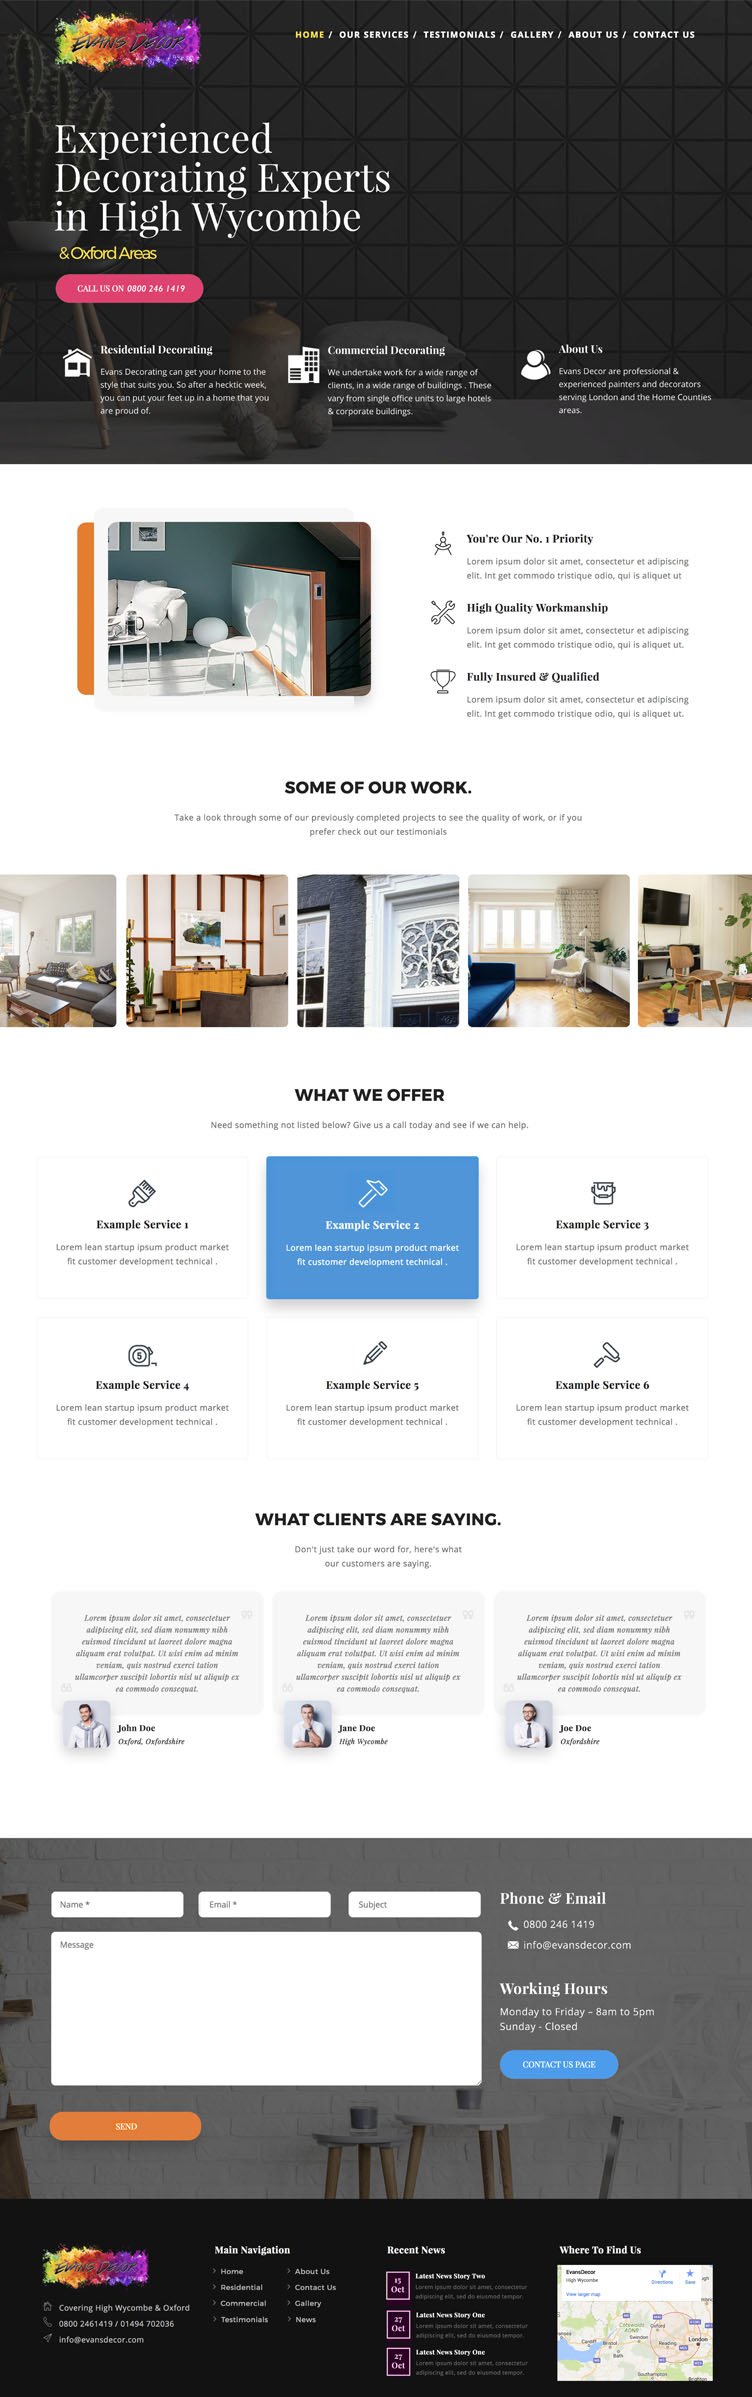 A full mockup of a web design project we completed for Evans Decor